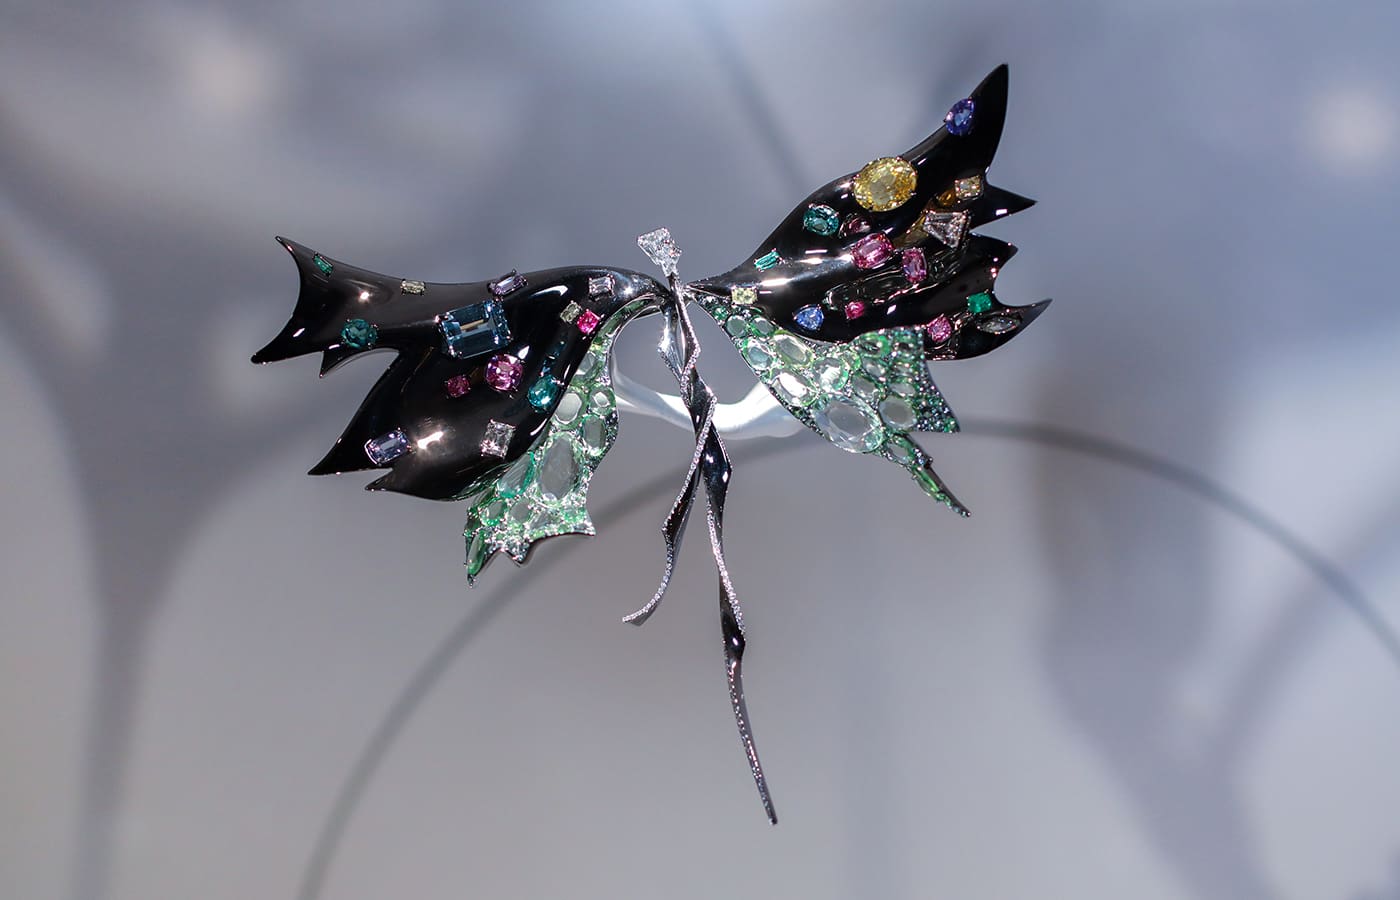 Feng J ‘Matisse Dragonfly’ brooch with emeralds, aquamarines, sapphires, spinel, tourmaline, double rose-cut tsavorites and white diamonds in lacquer on titanium and 18k gold